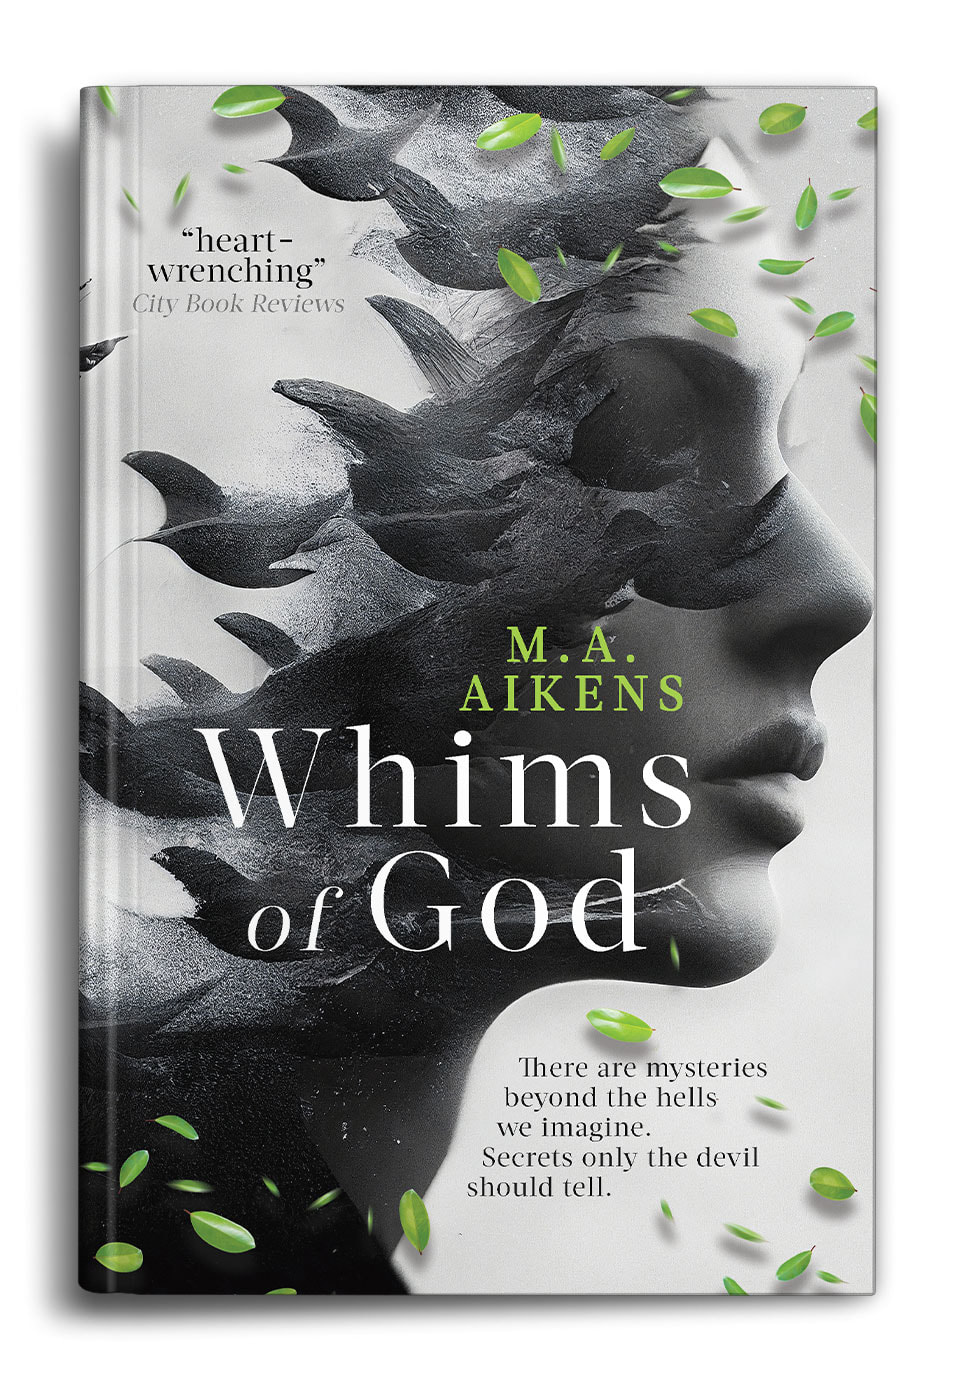 Whims of God by M.A. Atkins